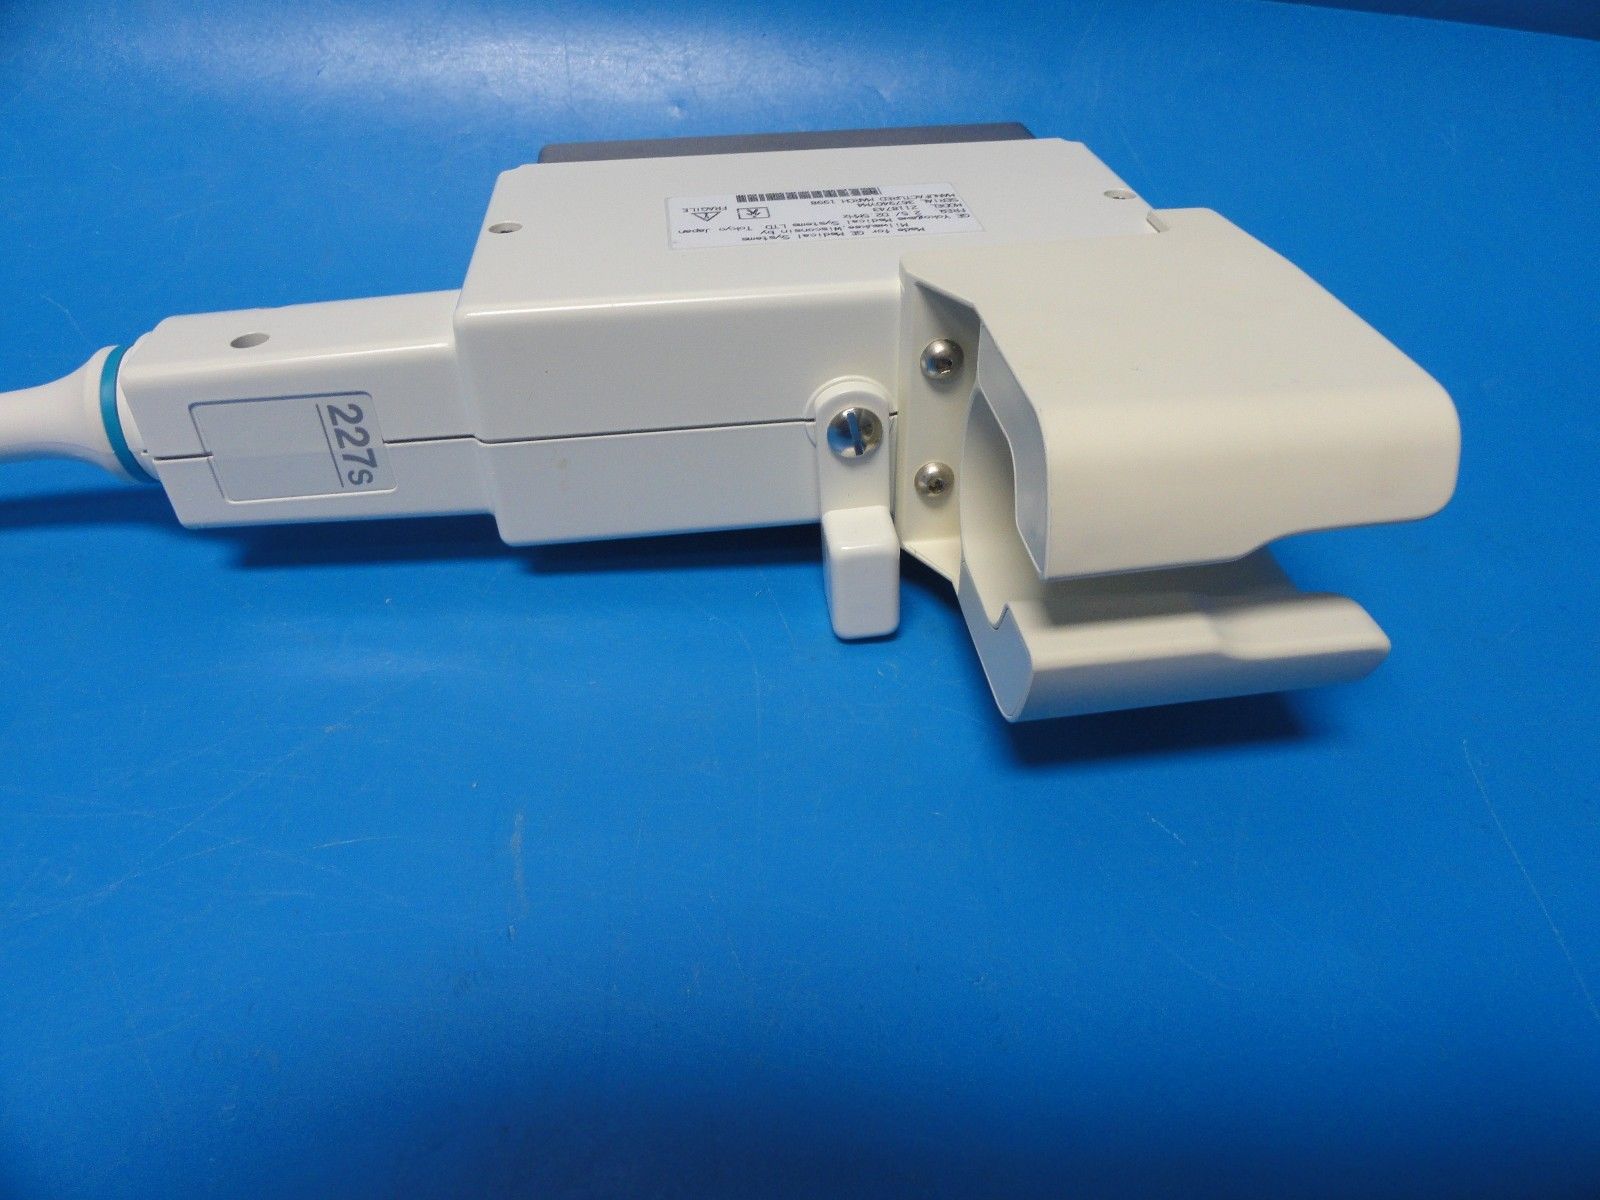 GE 227s P/N  2118743 Phased Array Sector Probe W/ Hook for GE Logiq 700 (8542) DIAGNOSTIC ULTRASOUND MACHINES FOR SALE